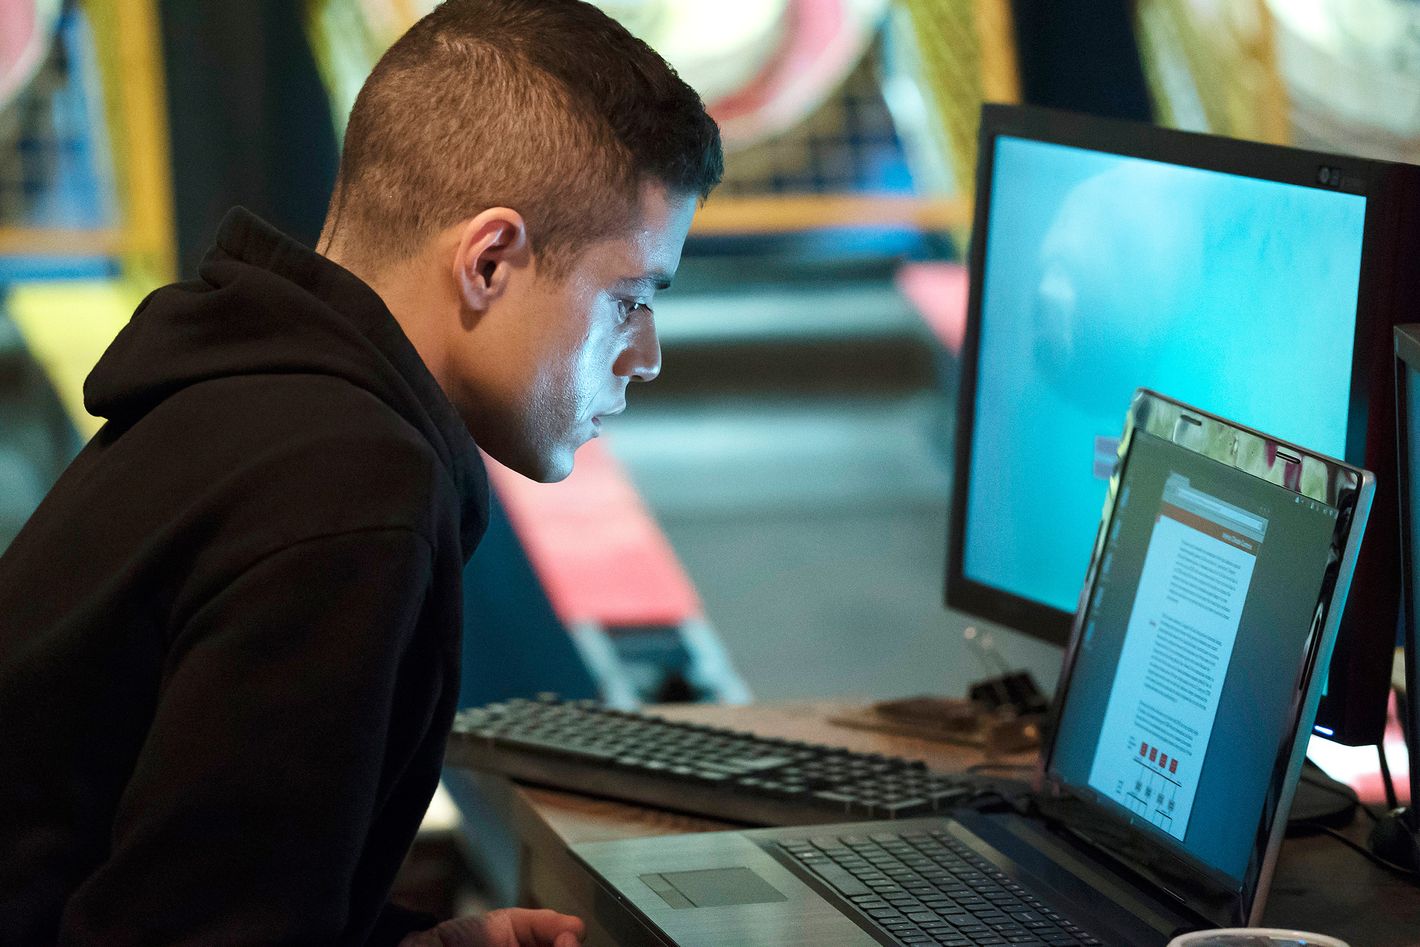 Helecho caravana entrar The Unusually Accurate Portrait of Hacking on USA's Mr. Robot